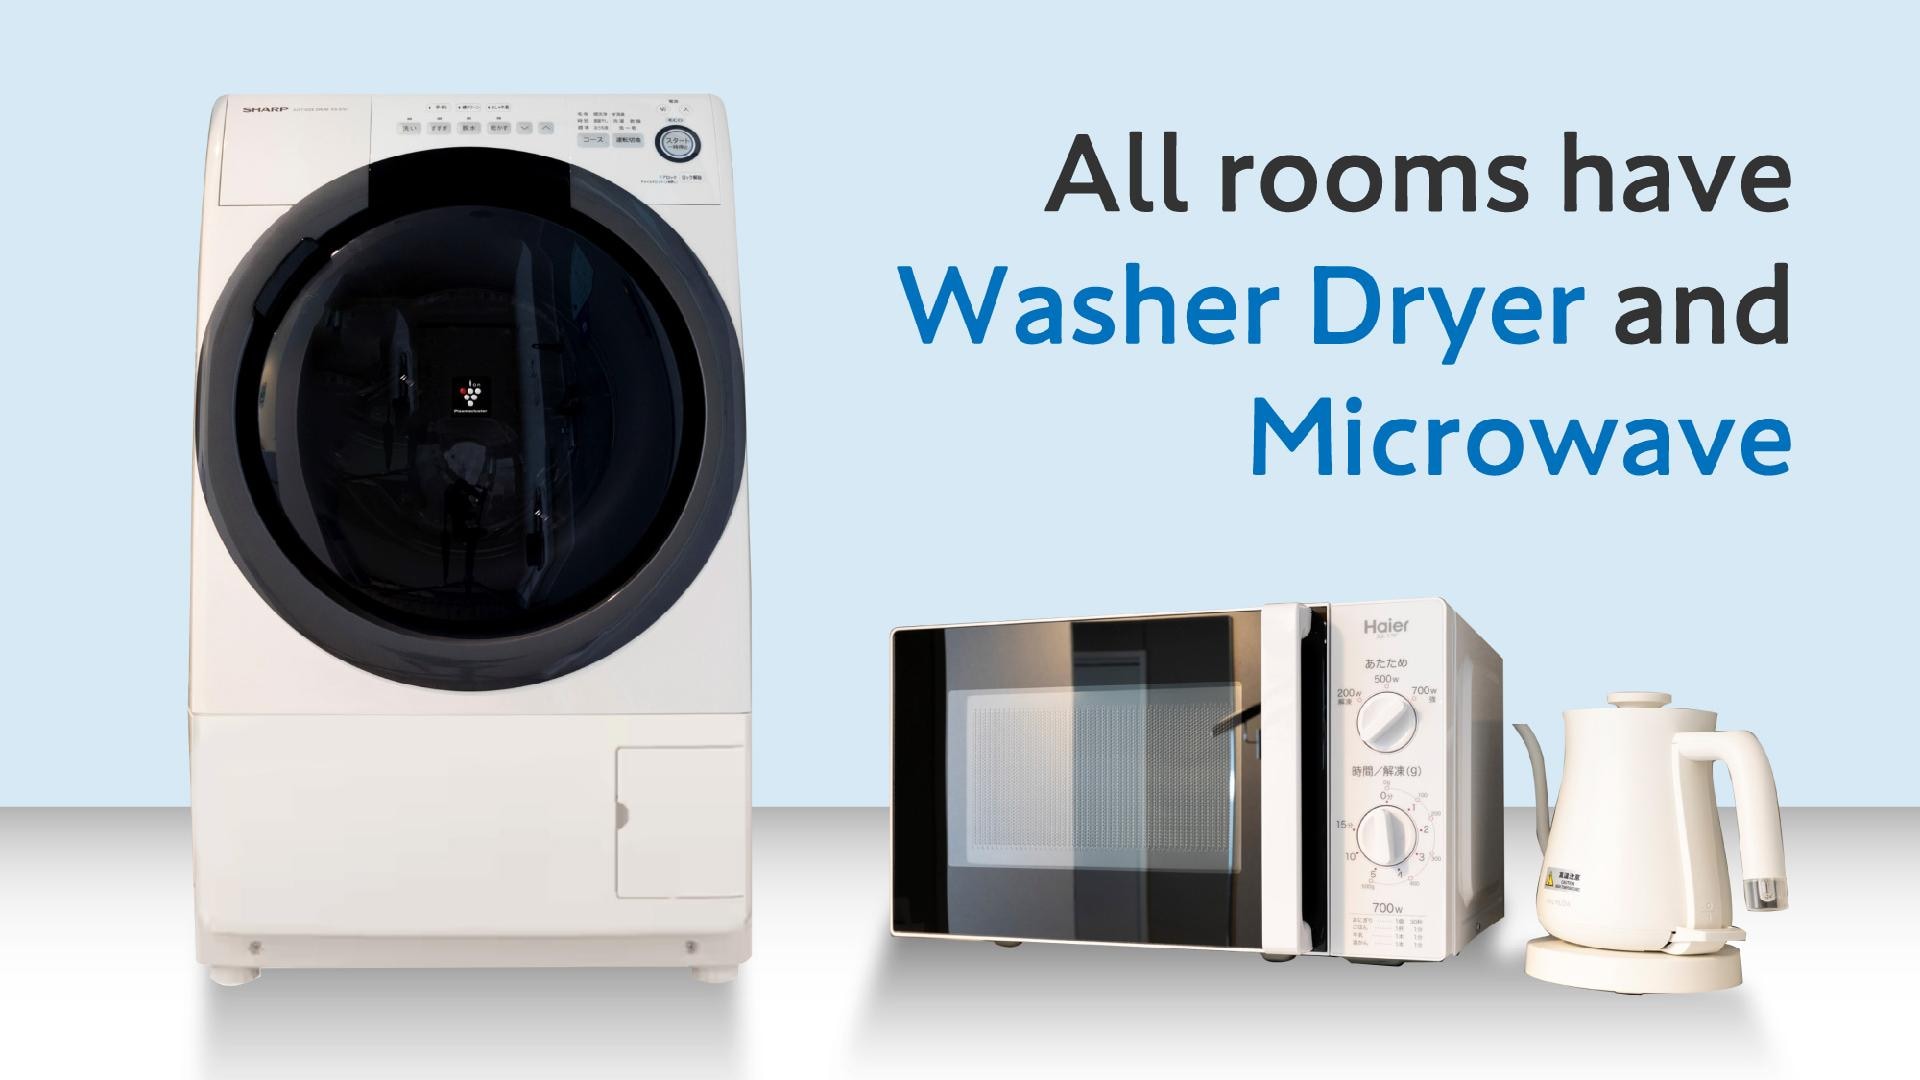 Equipped with washer/dryer, microwave oven, electric kettle